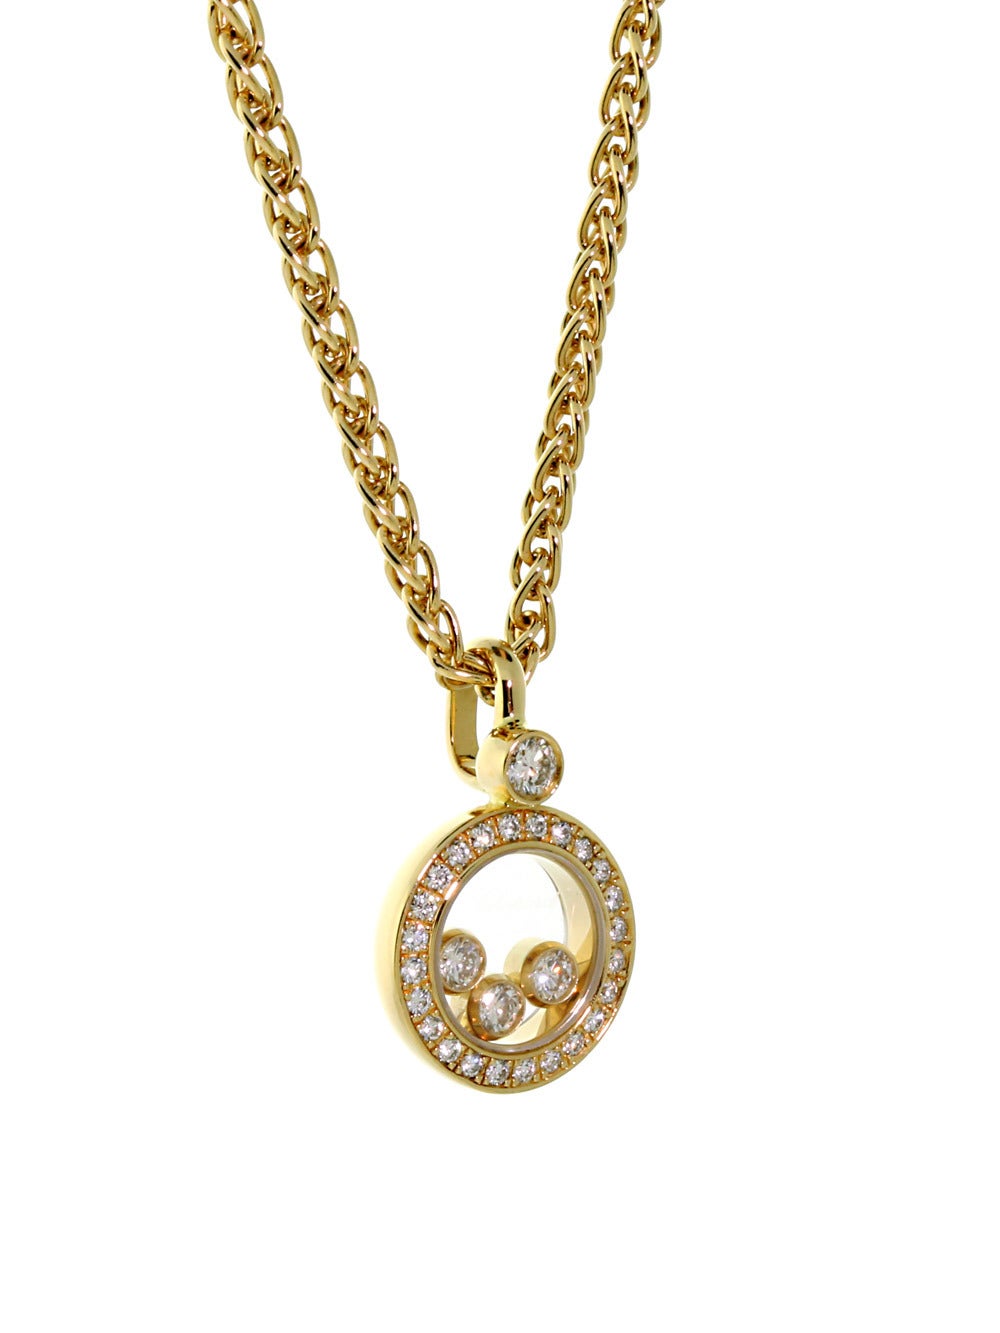 What better way to complete a classy outfit than with this 18k Yellow Gold Happy Diamond Necklace by Chopard? The 28 Round Brilliant Cut Diamonds glitter brightly and beckon admiring glances, while the 16″ Yellow Gold chain dangles gracefully at